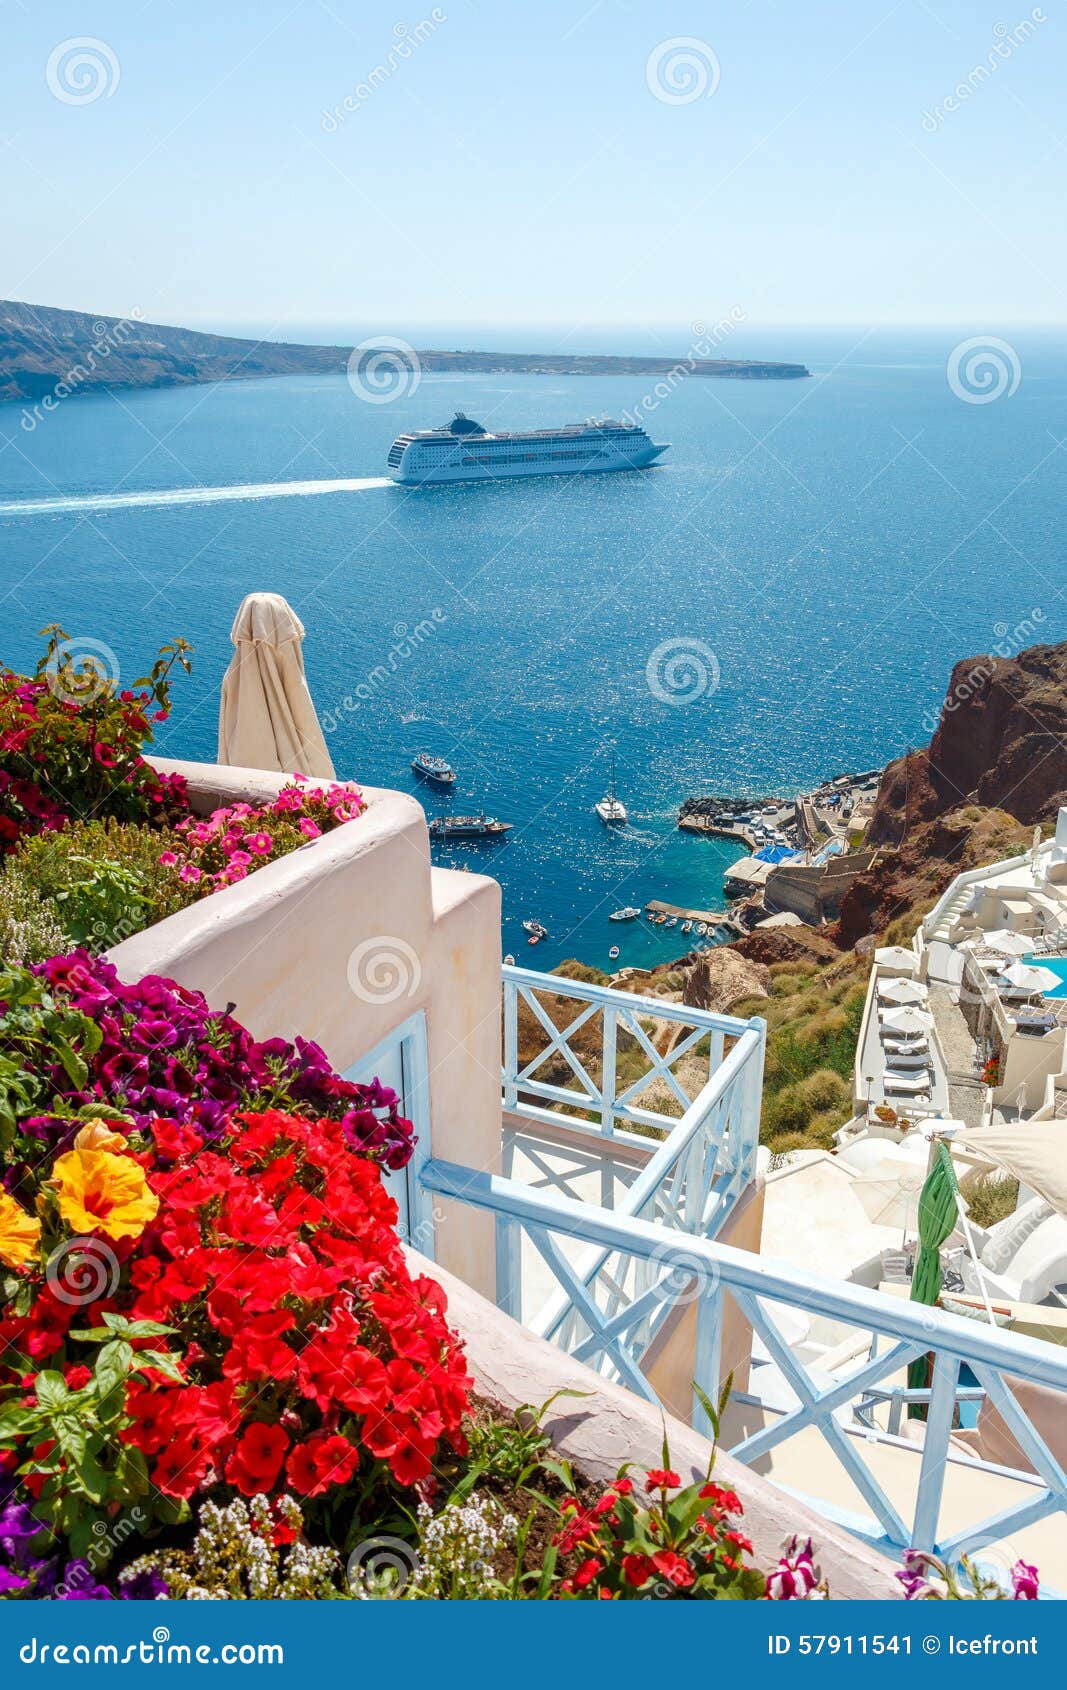 flowers, buildings and cruise ship in oia, santorini